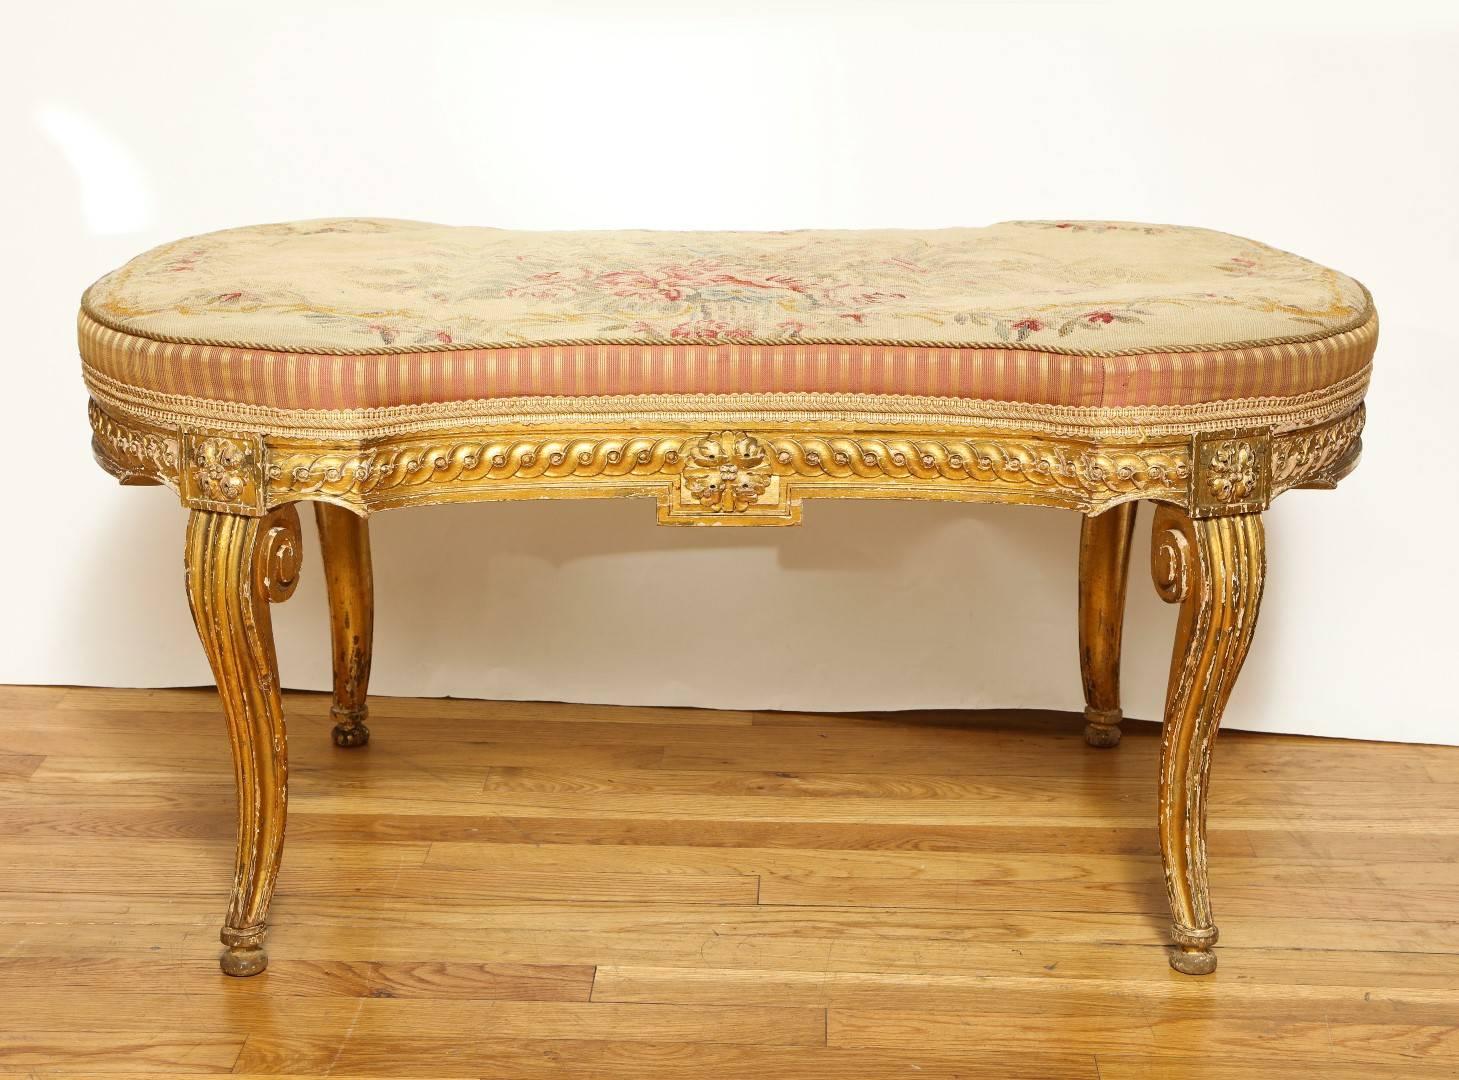 A French Louis VX style bench, the carved and giltwood frame having cabriole legs and shaped apron. The seat upholstered with fine late 19th century Aubusson tapestry, circa 1920.